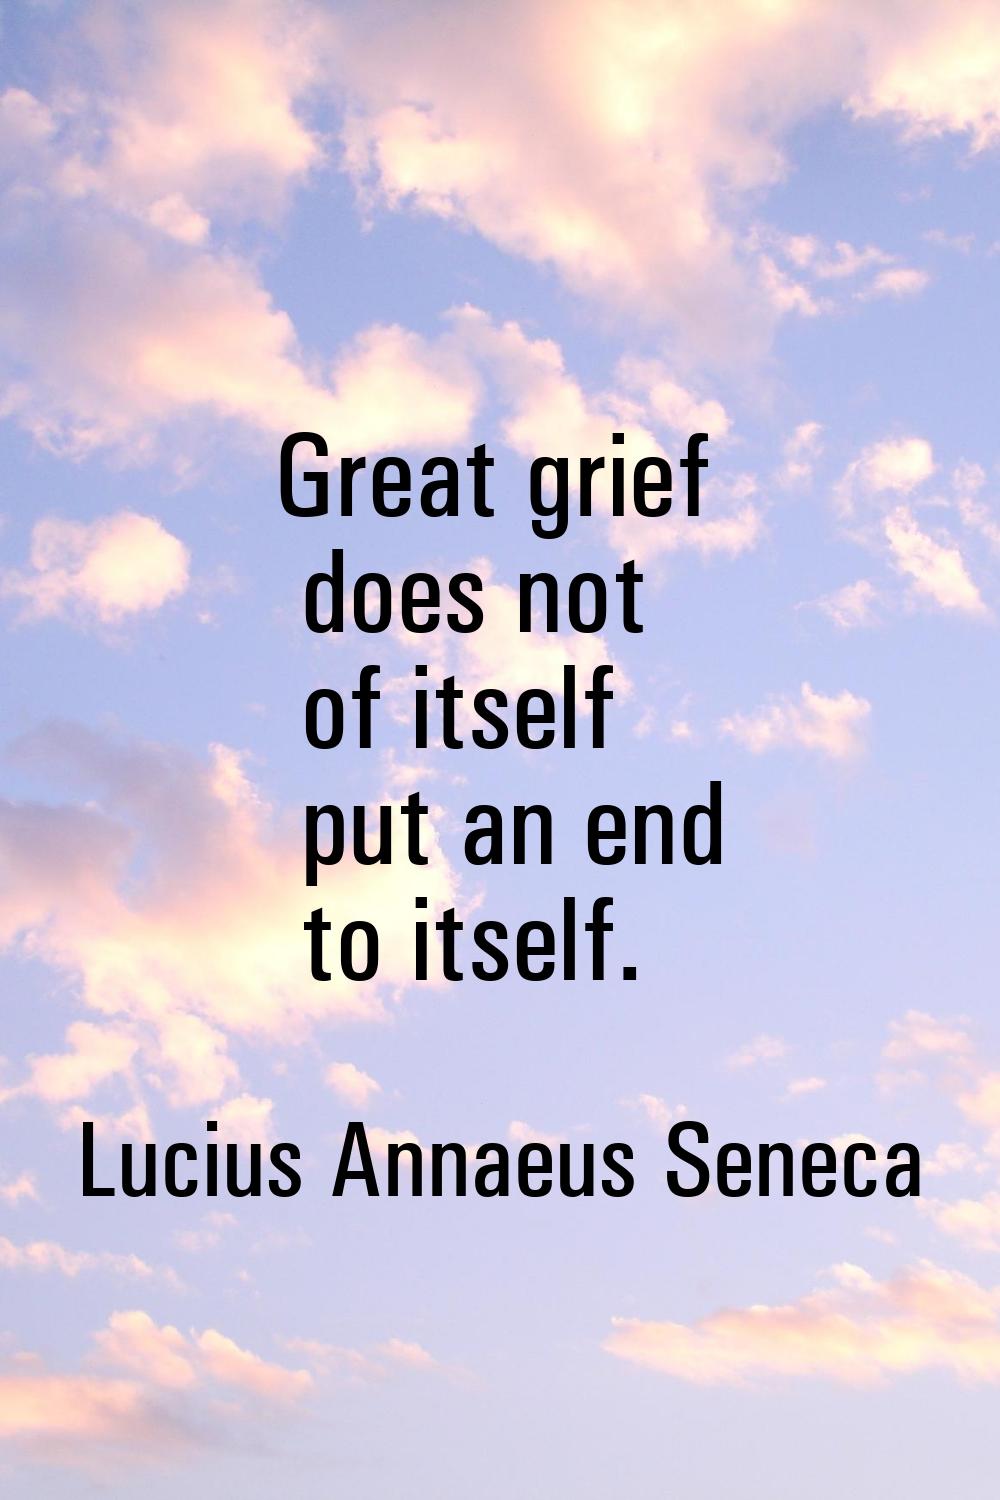 Great grief does not of itself put an end to itself.